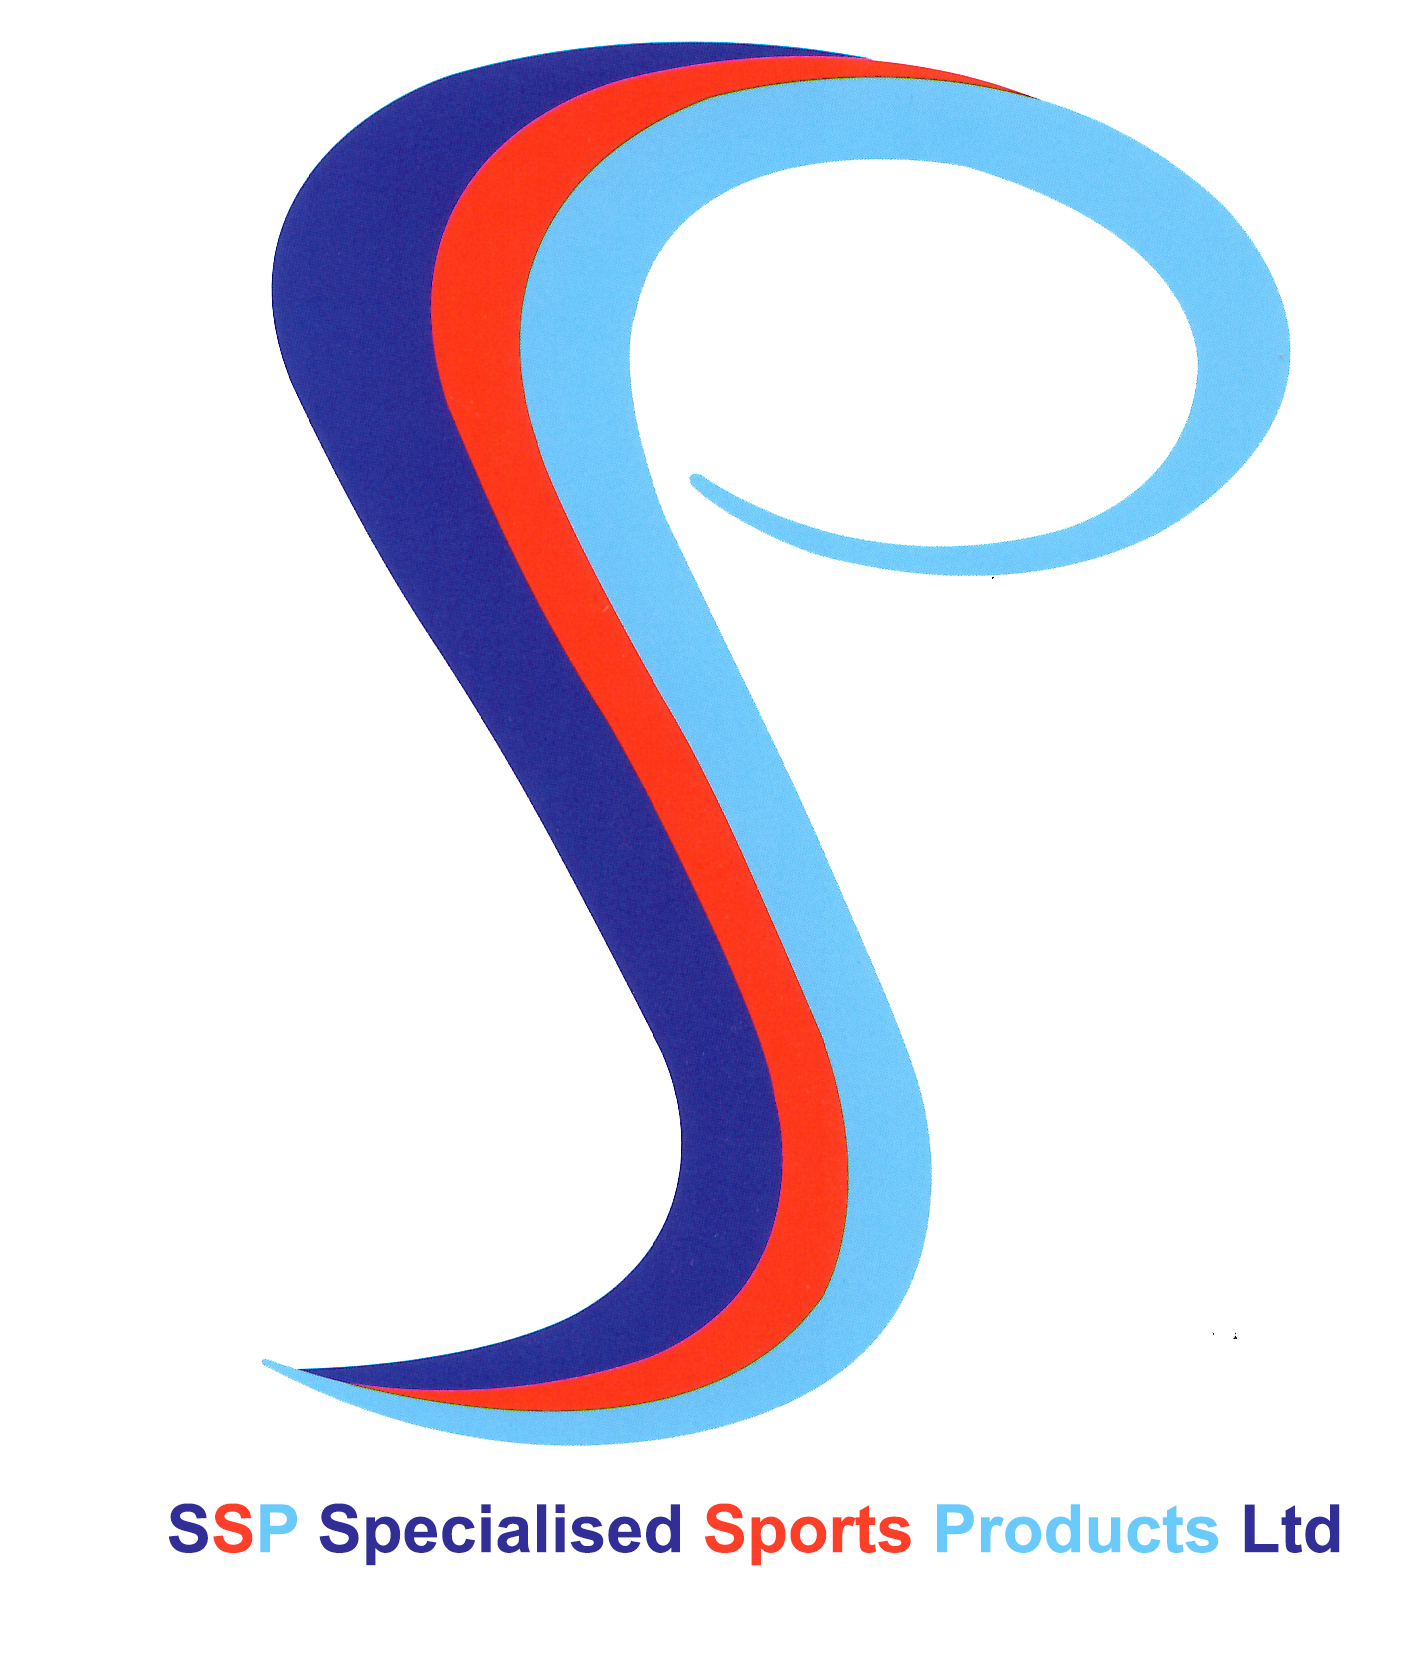 Specialised Sports Products Ltd